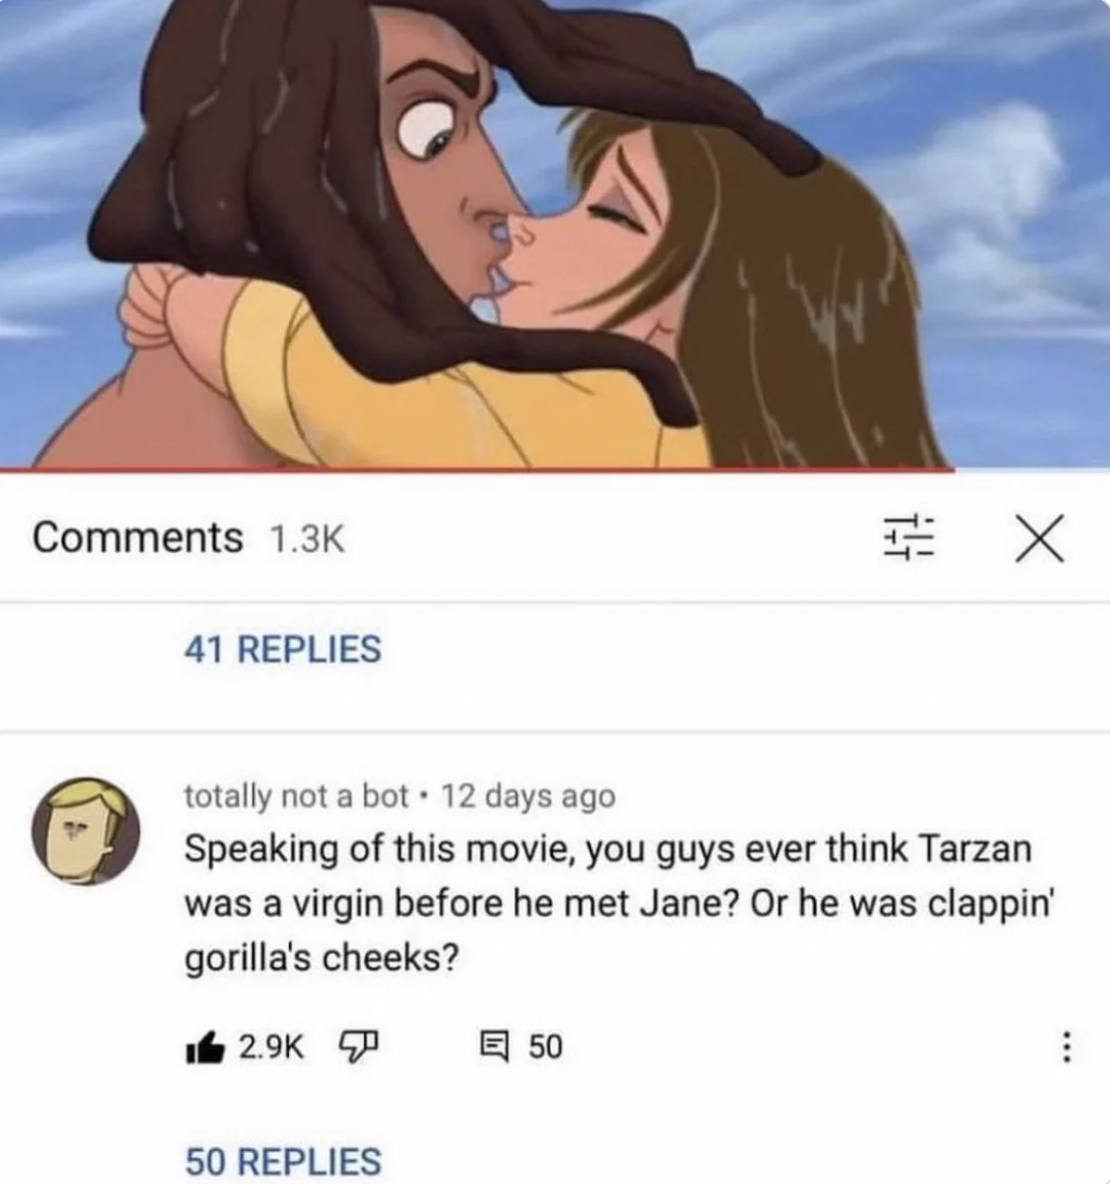 cartoon - 41 Replies totally not a bot. 12 days ago Speaking of this movie, you guys ever think Tarzan was a virgin before he met Jane? Or he was clappin' gorilla's cheeks? 50 Replies X 50